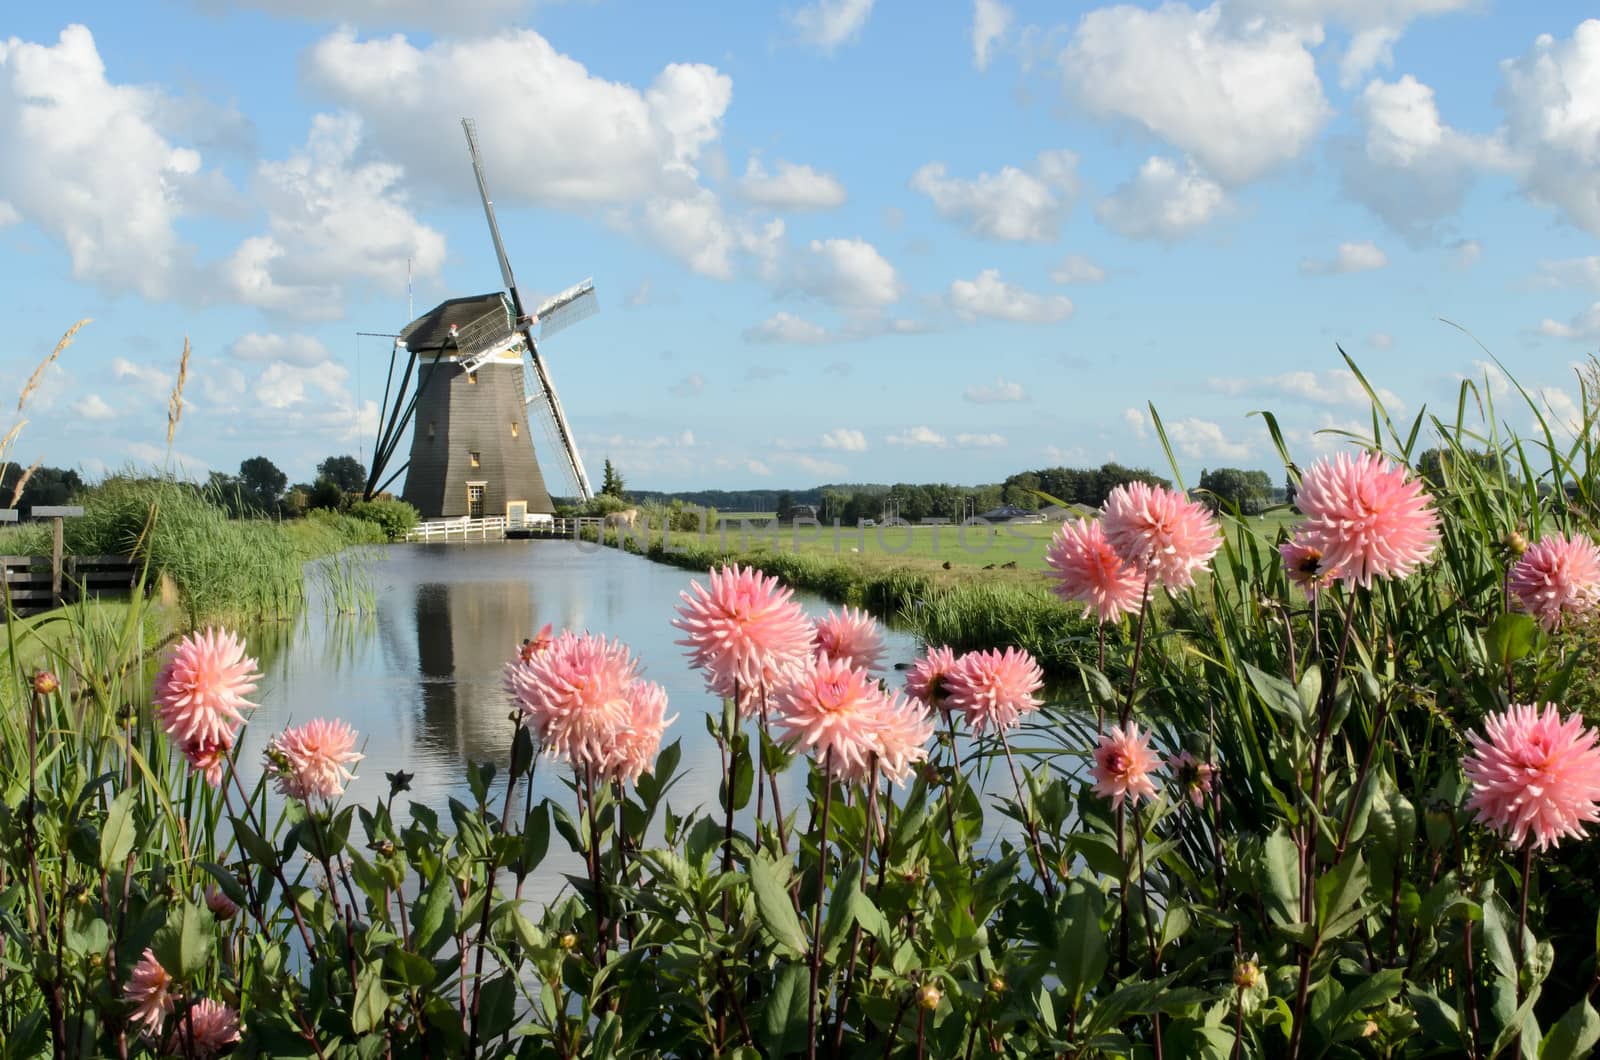 Landscape in Holland with a windmill, pink dahlia flowers and a canal.